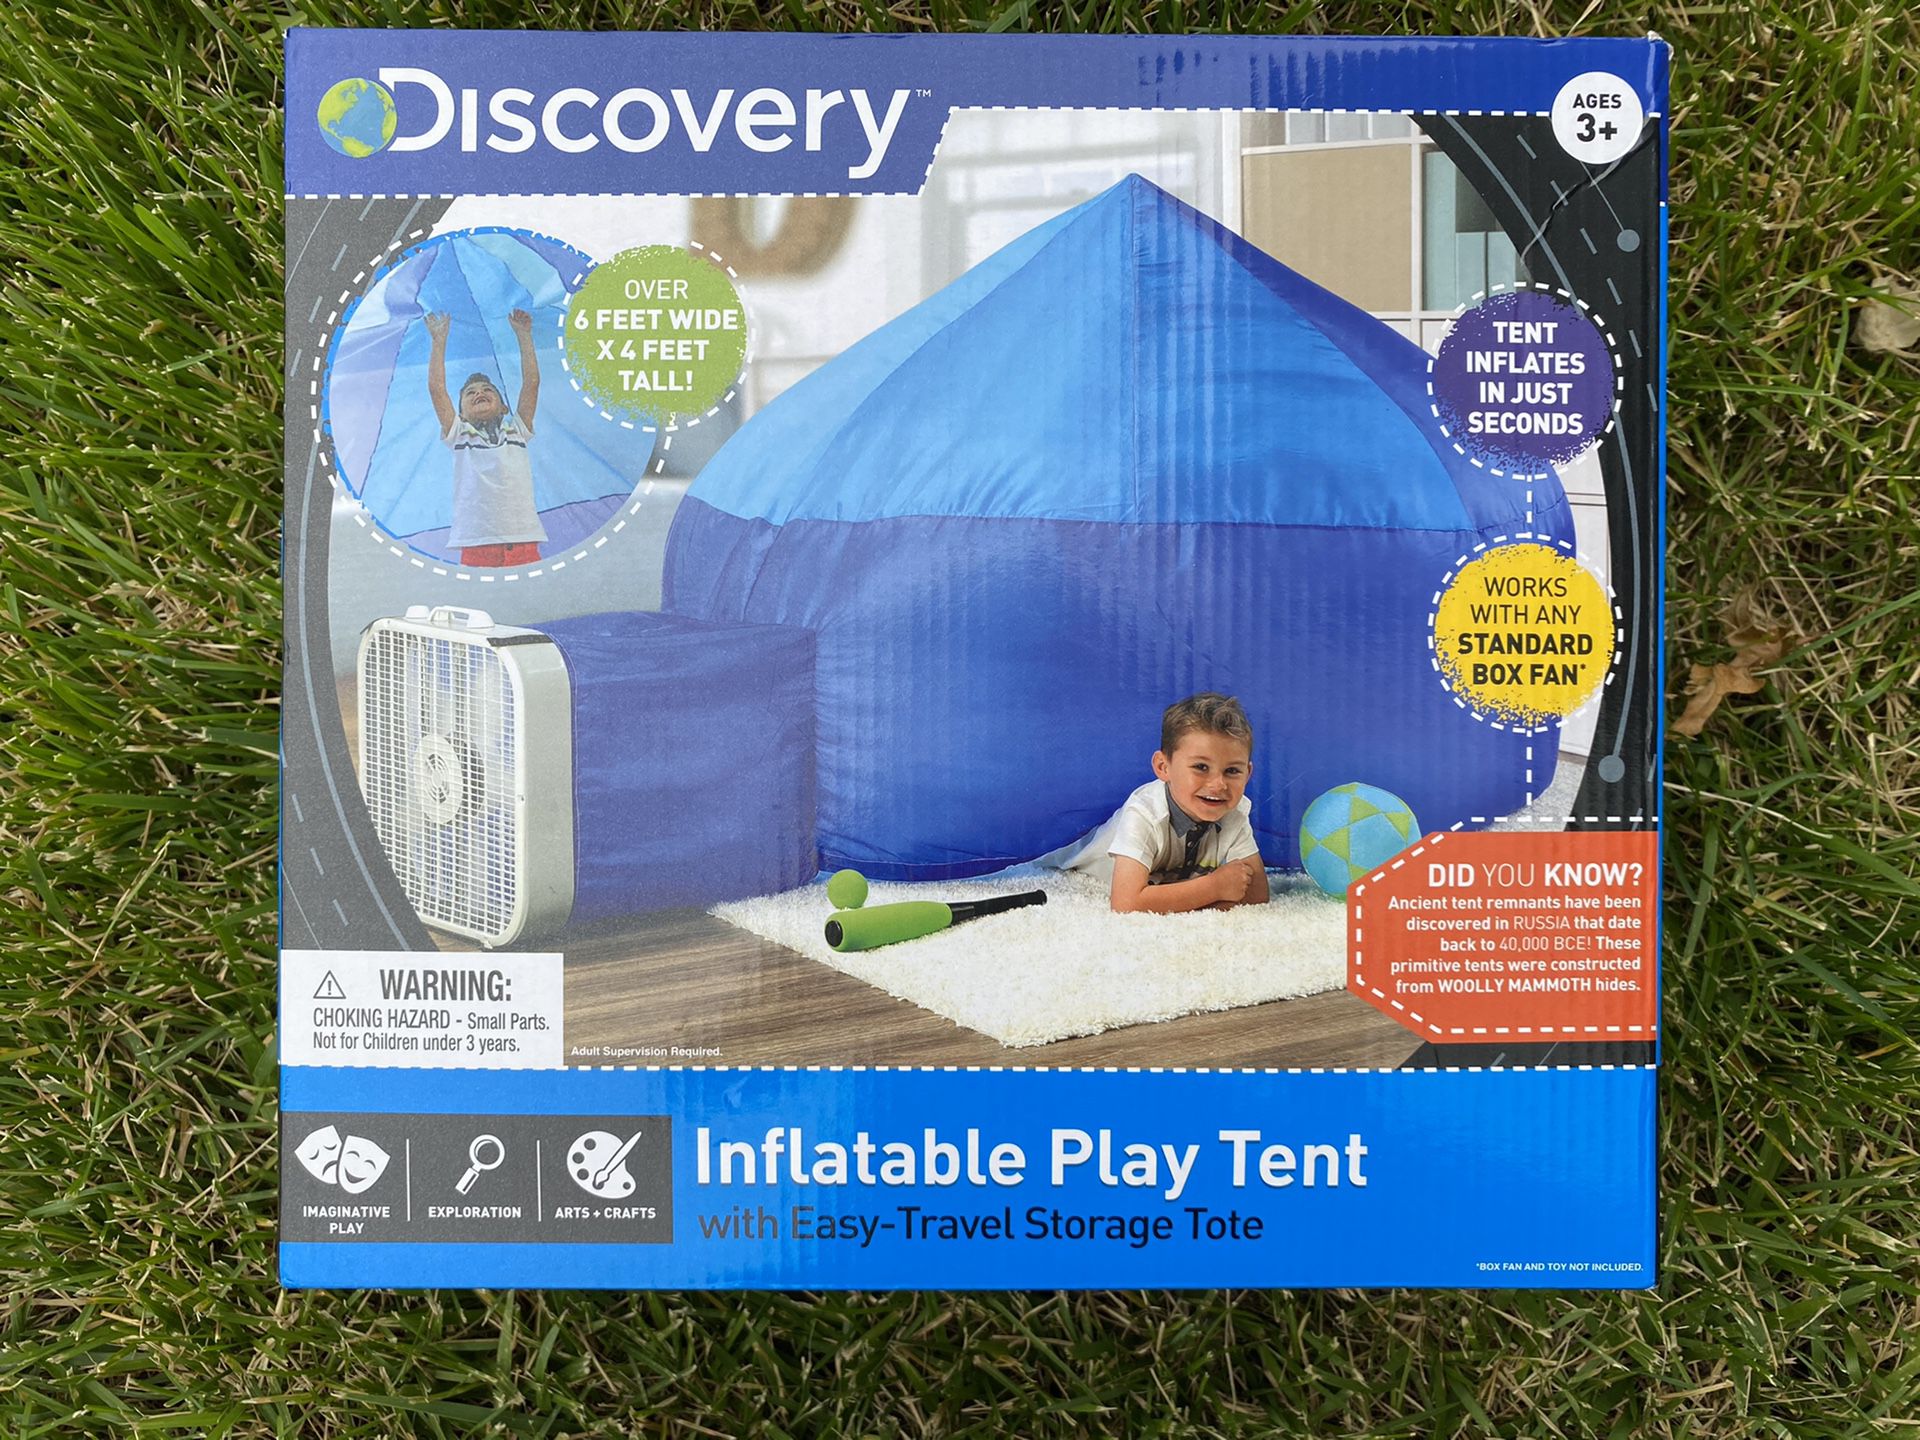 New - Inflatable Play Tent